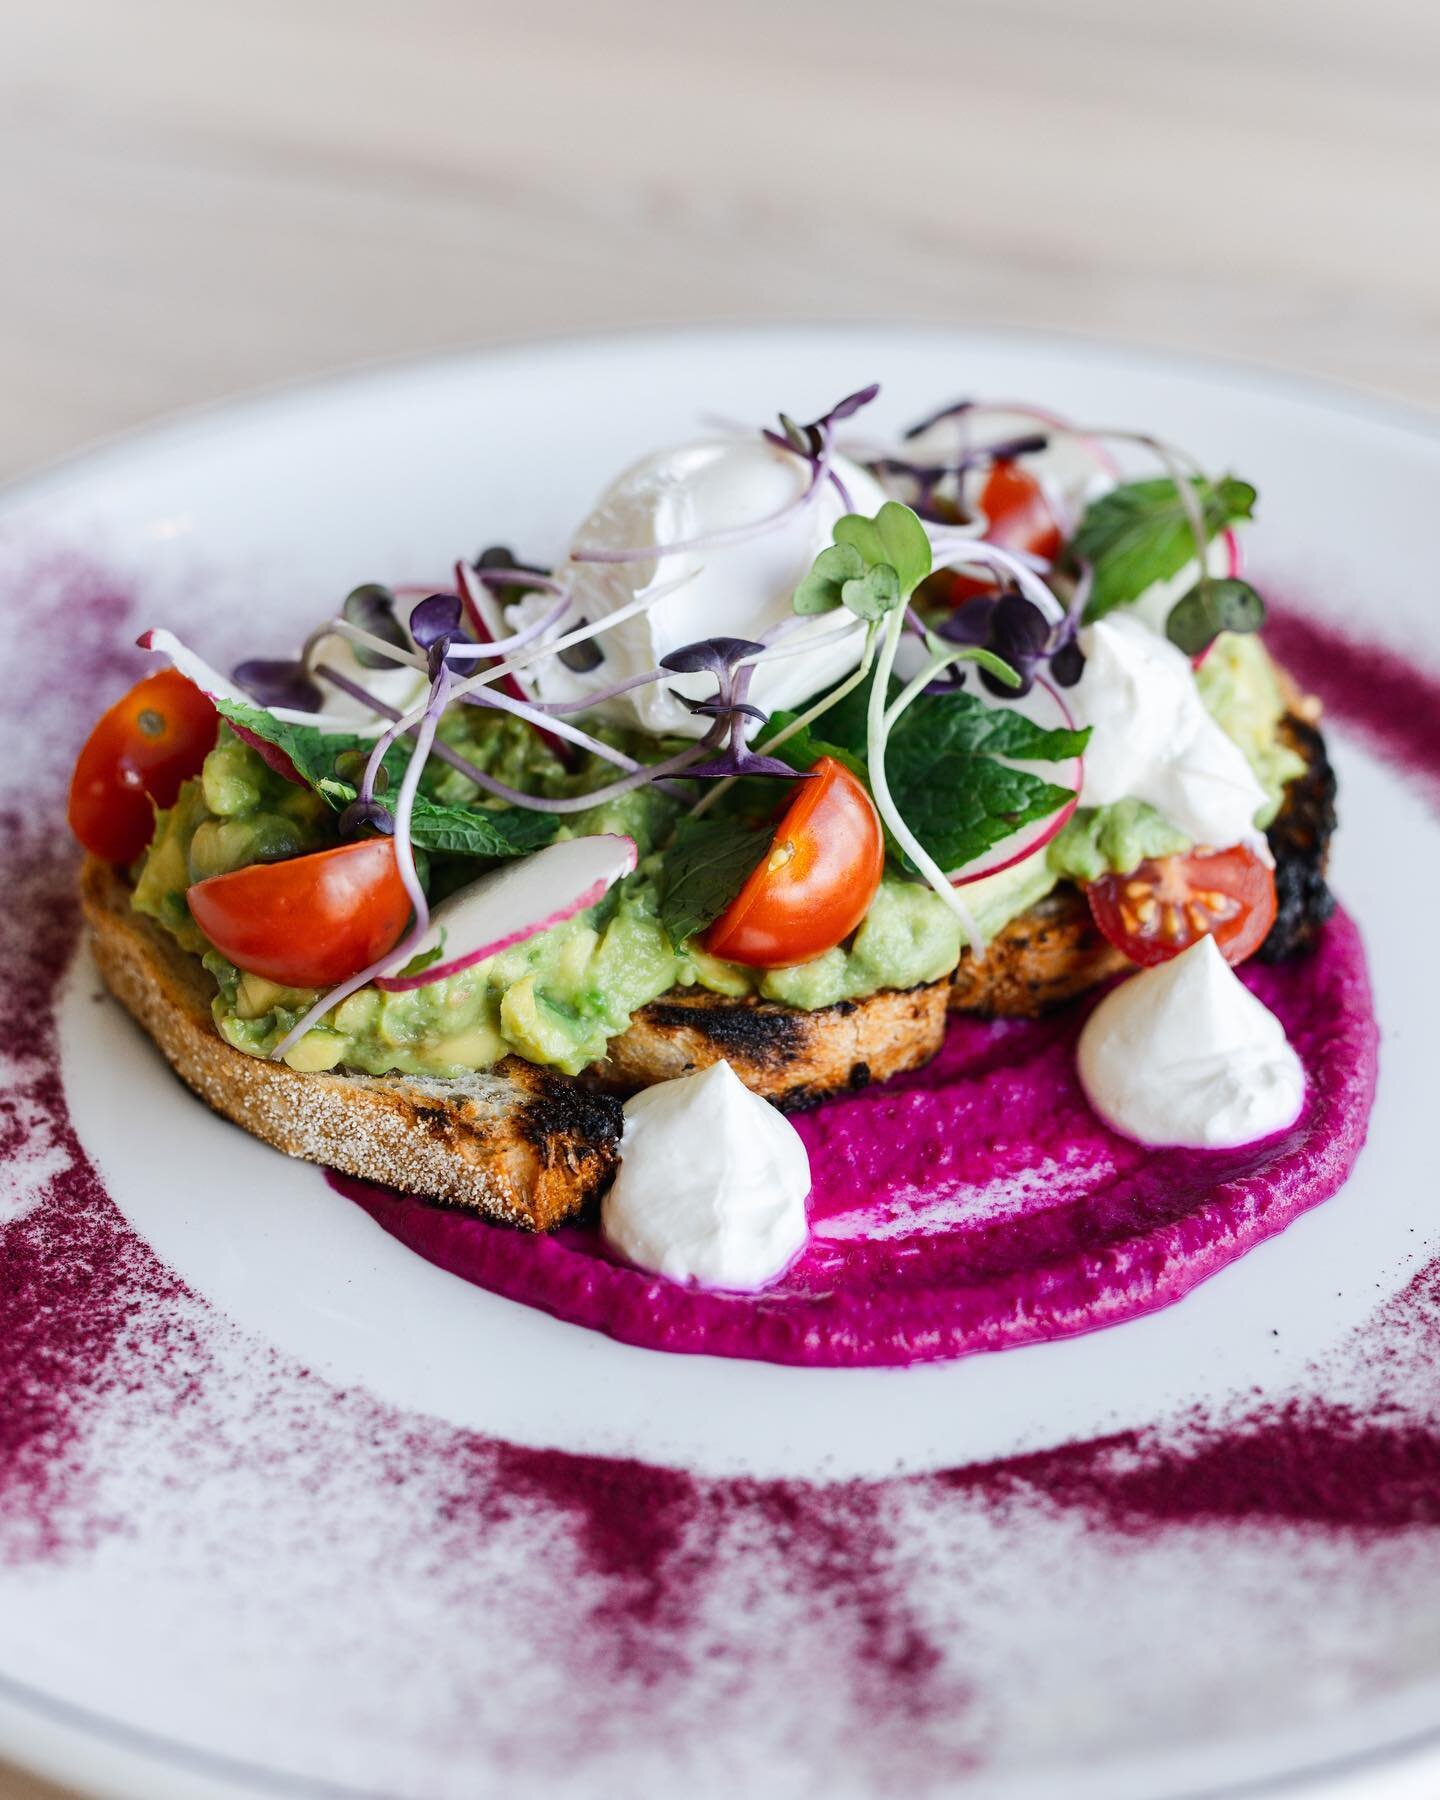 Get your Sunday morning off to a great start with our SMASHED AVO.

Served with - a poached egg, beetroot hummus, radish, cherry tomatoes, feta, mint and multigrain on toast.